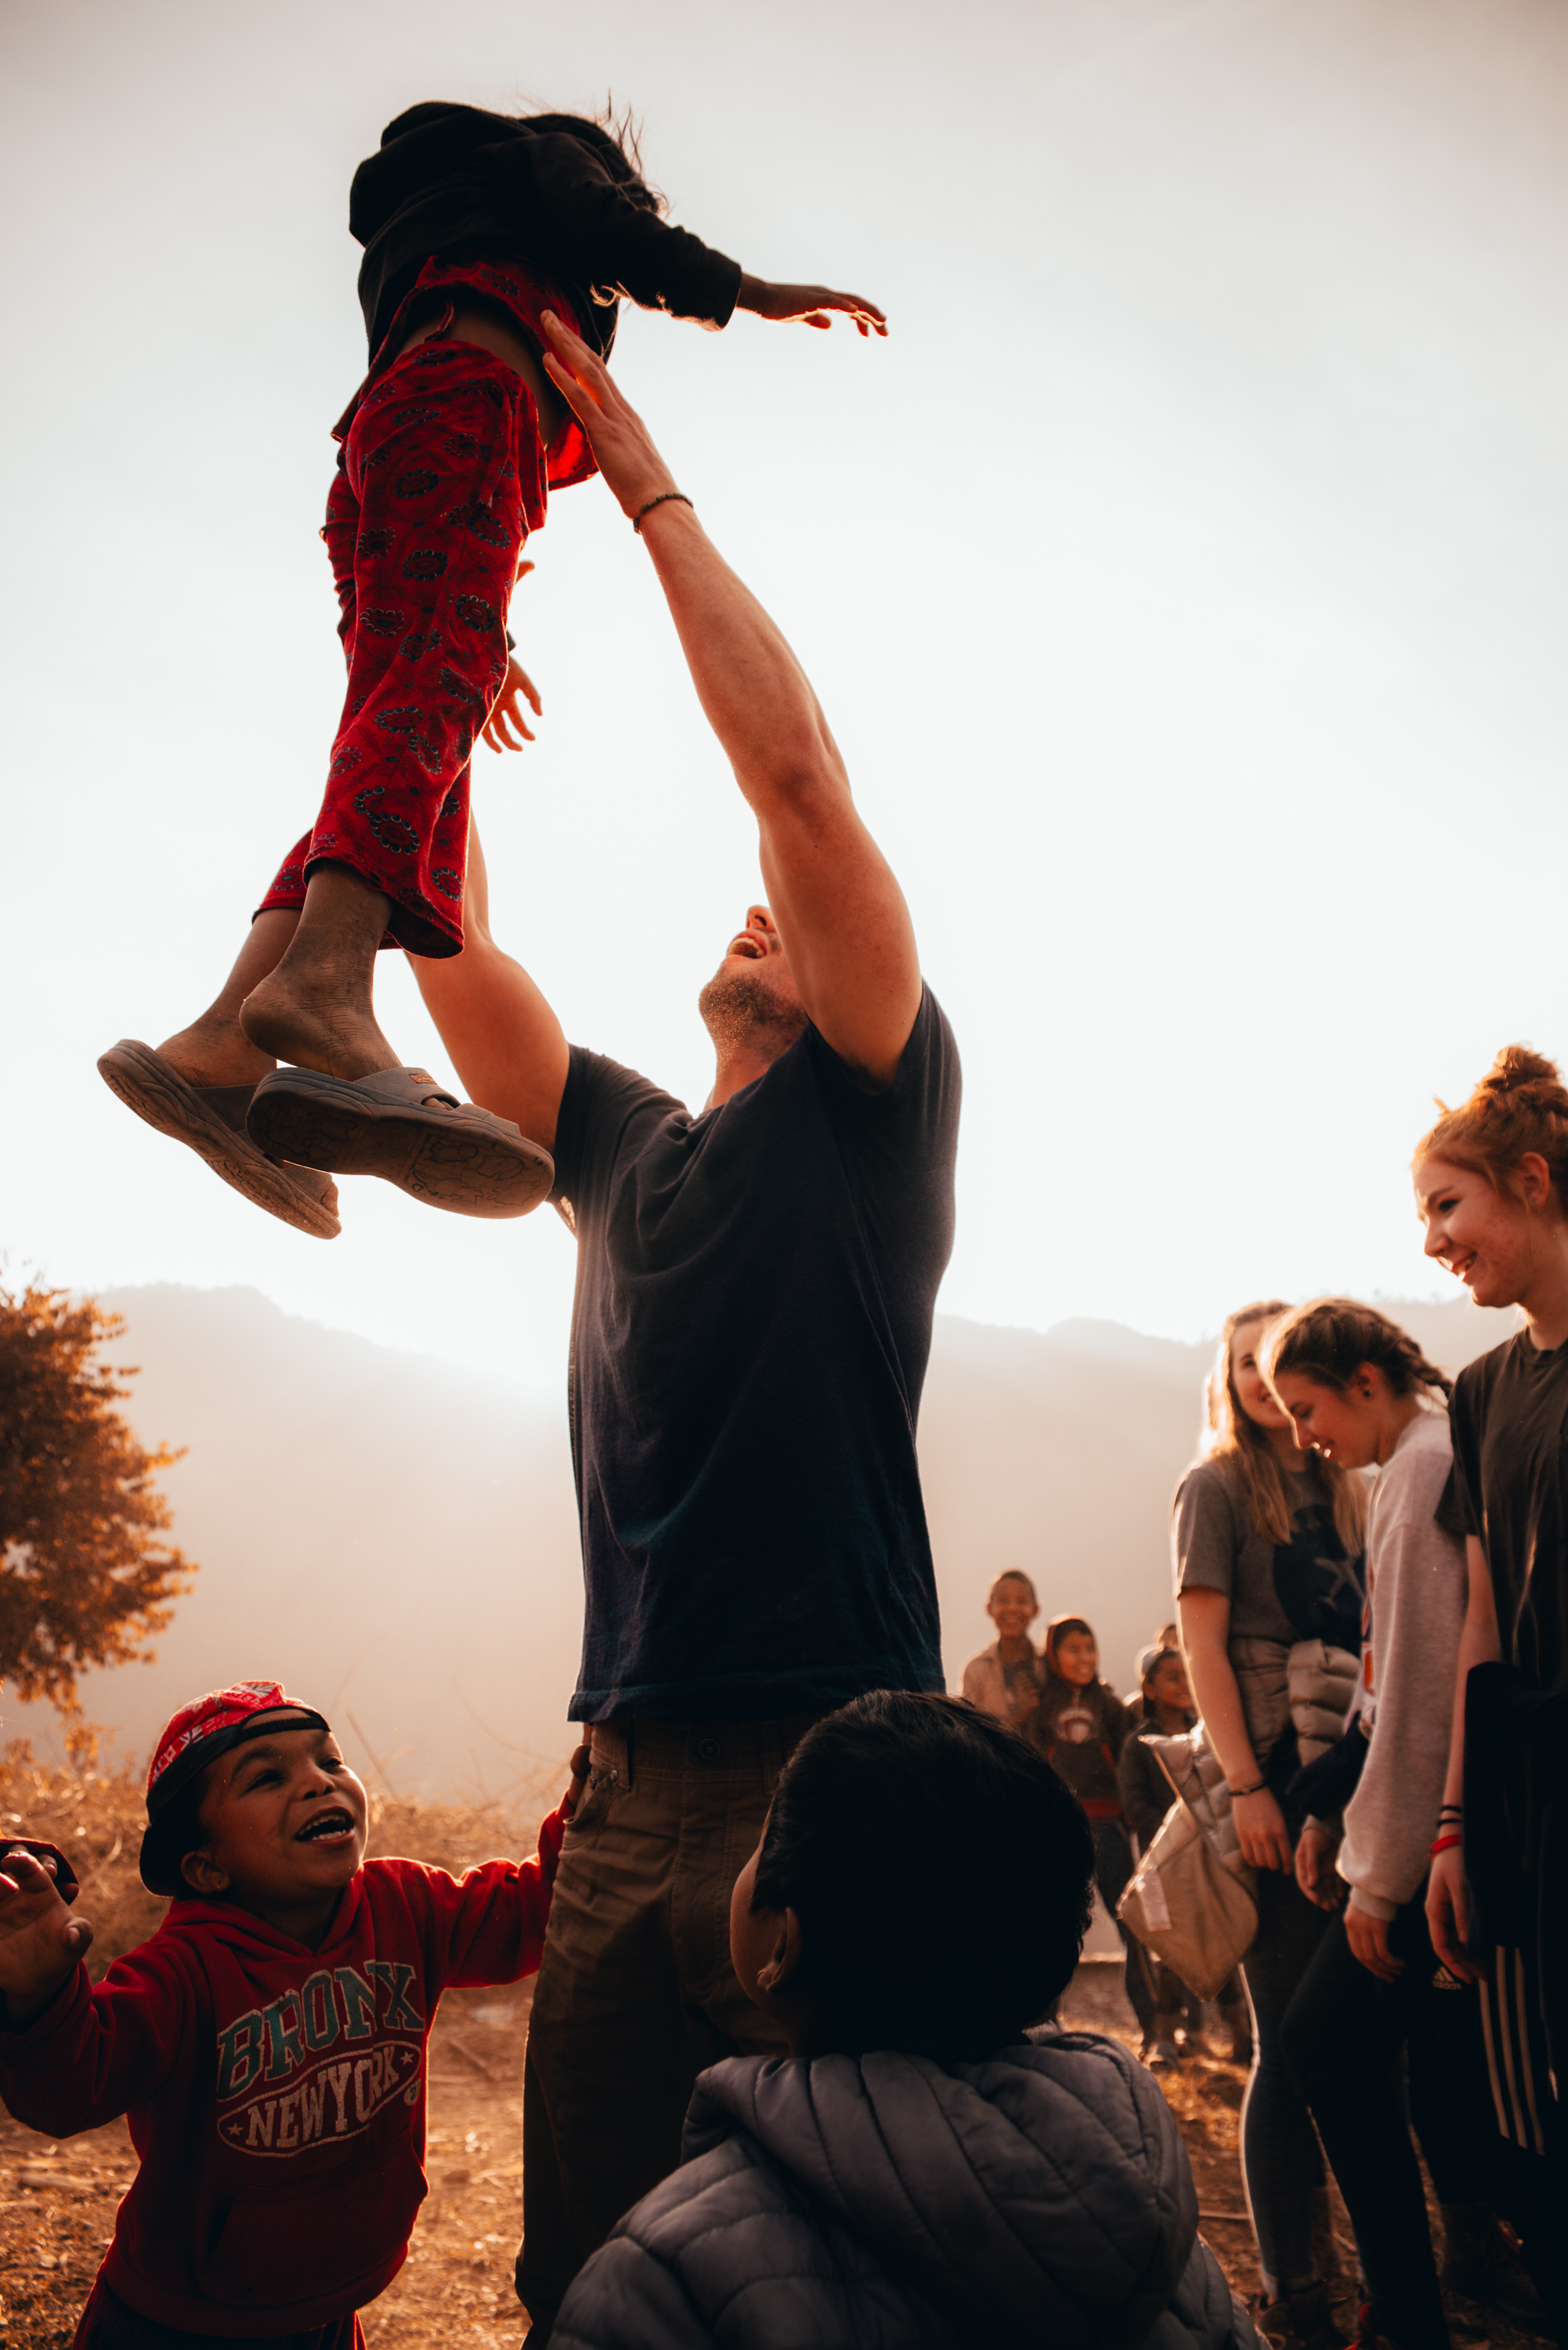 man throwing boy in the air playing